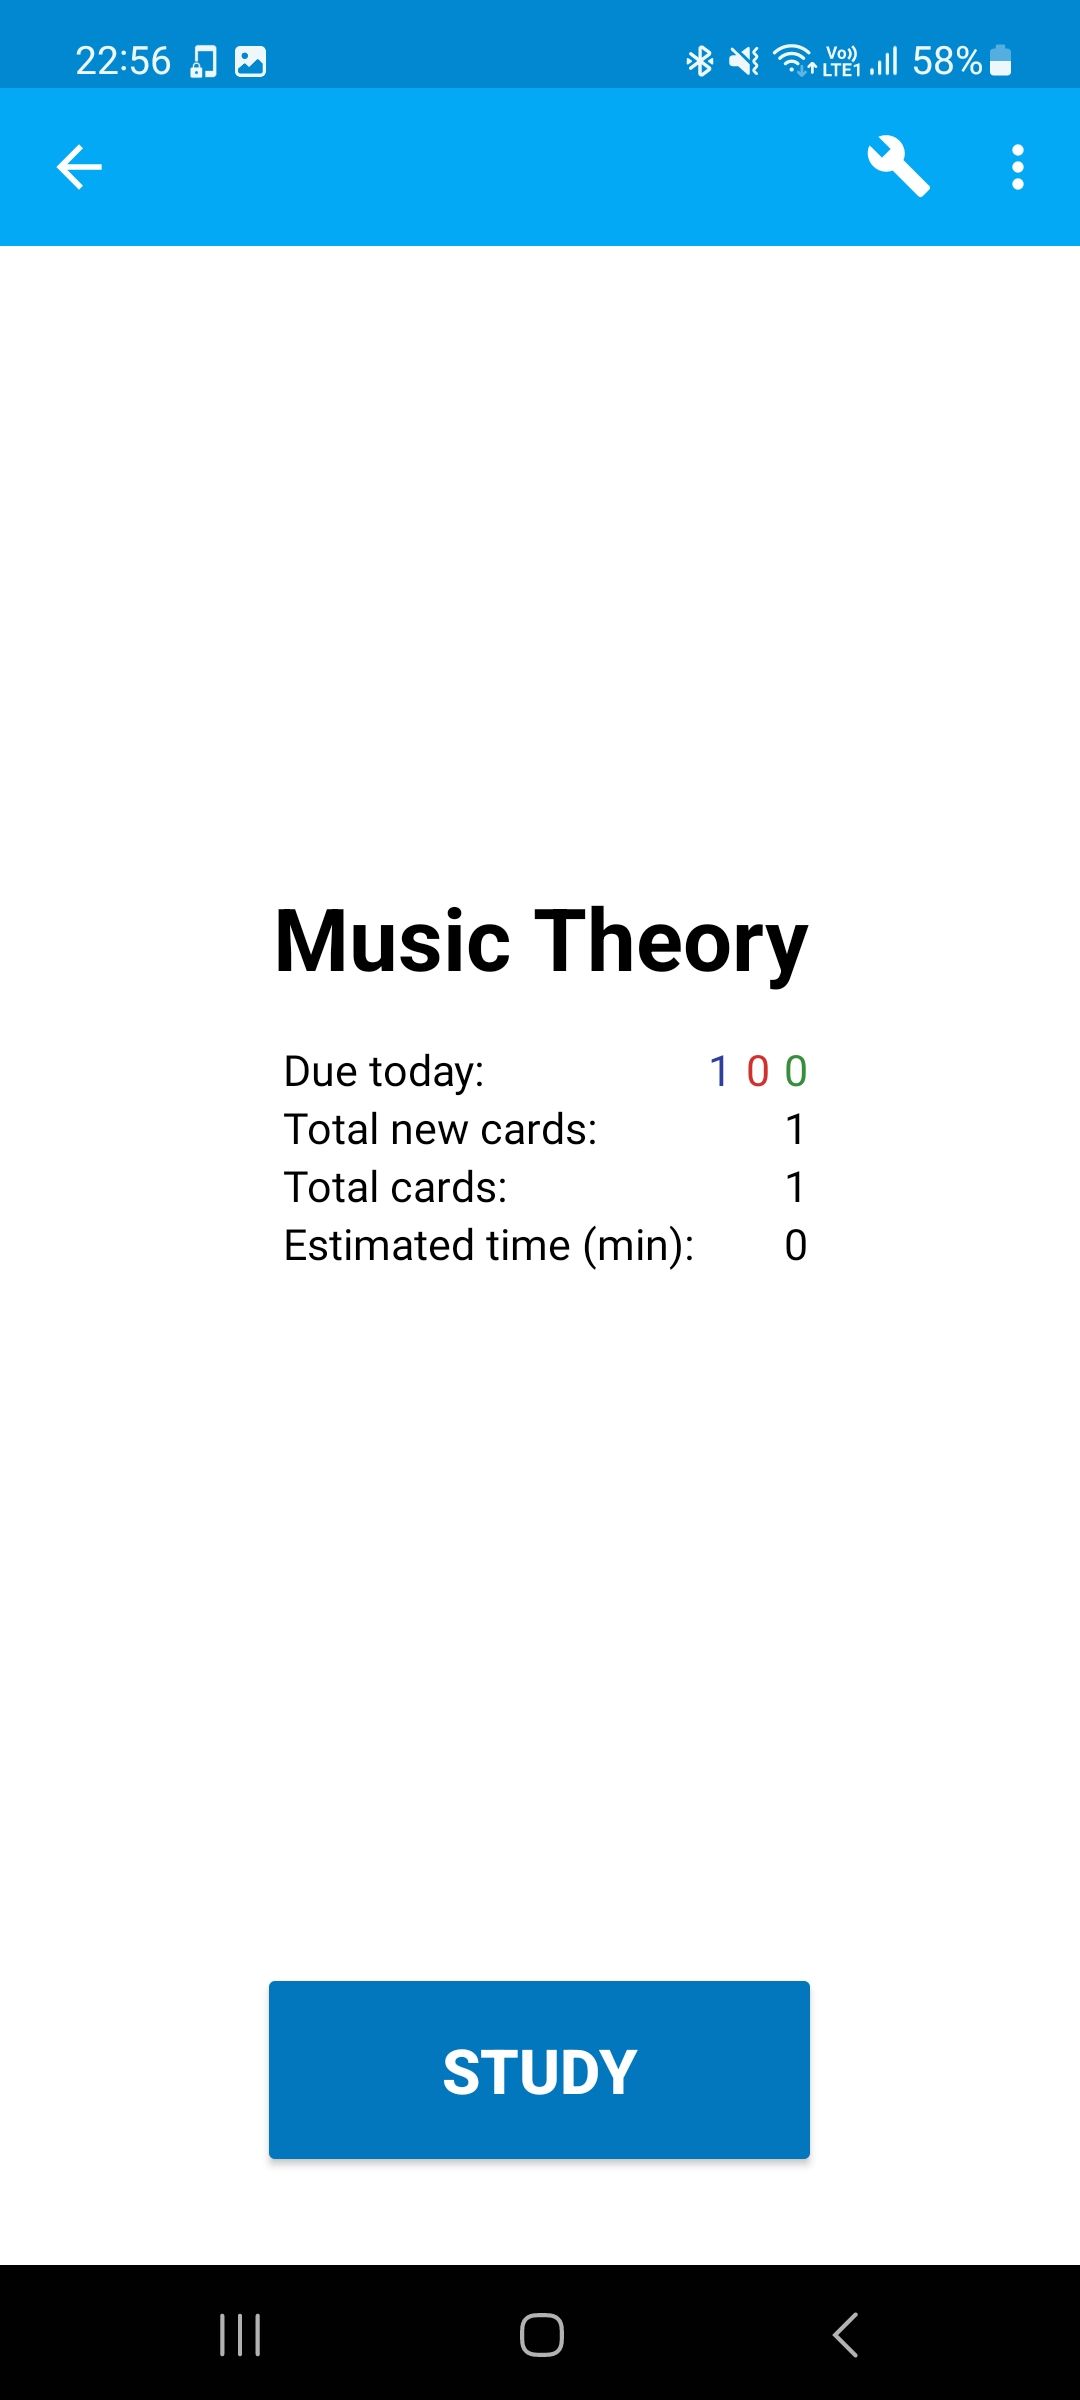 Music Theory Testing Flashcards in AnkiDroid